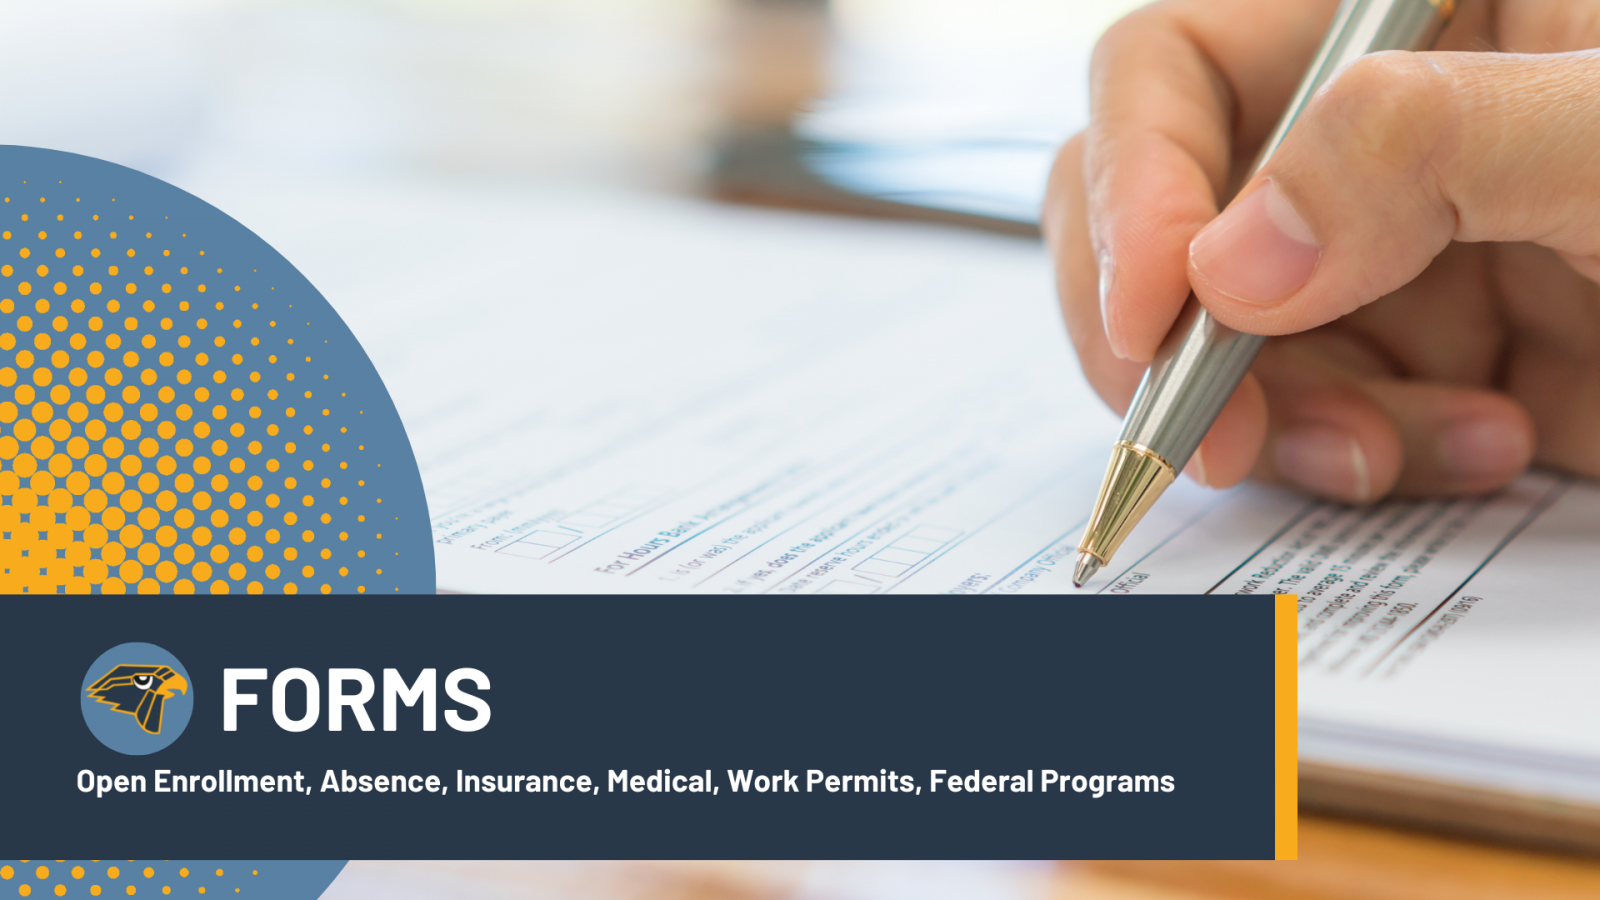 Forms: Open Enrollment, Absence, Insurance, Medical, Work Permits, Federal Programs